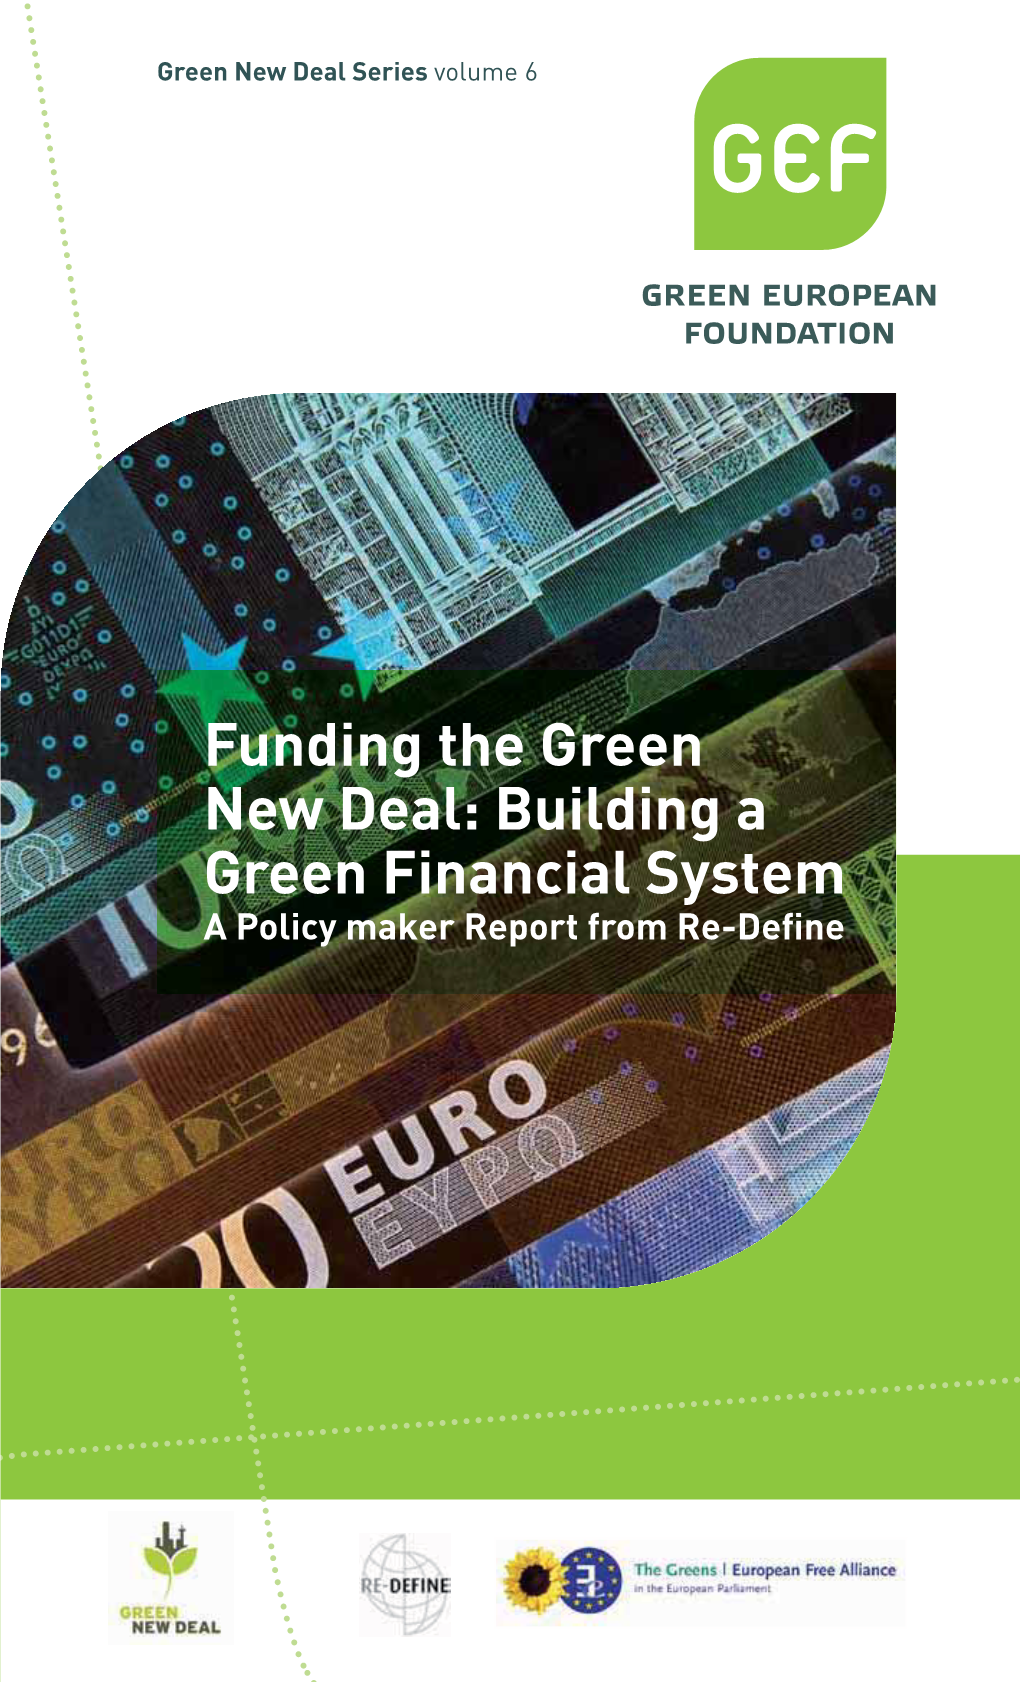 Funding the Green New Deal: Building a Green Financial System a Policy Maker Report from Re-Deﬁne Green New Deal Series Volume 6